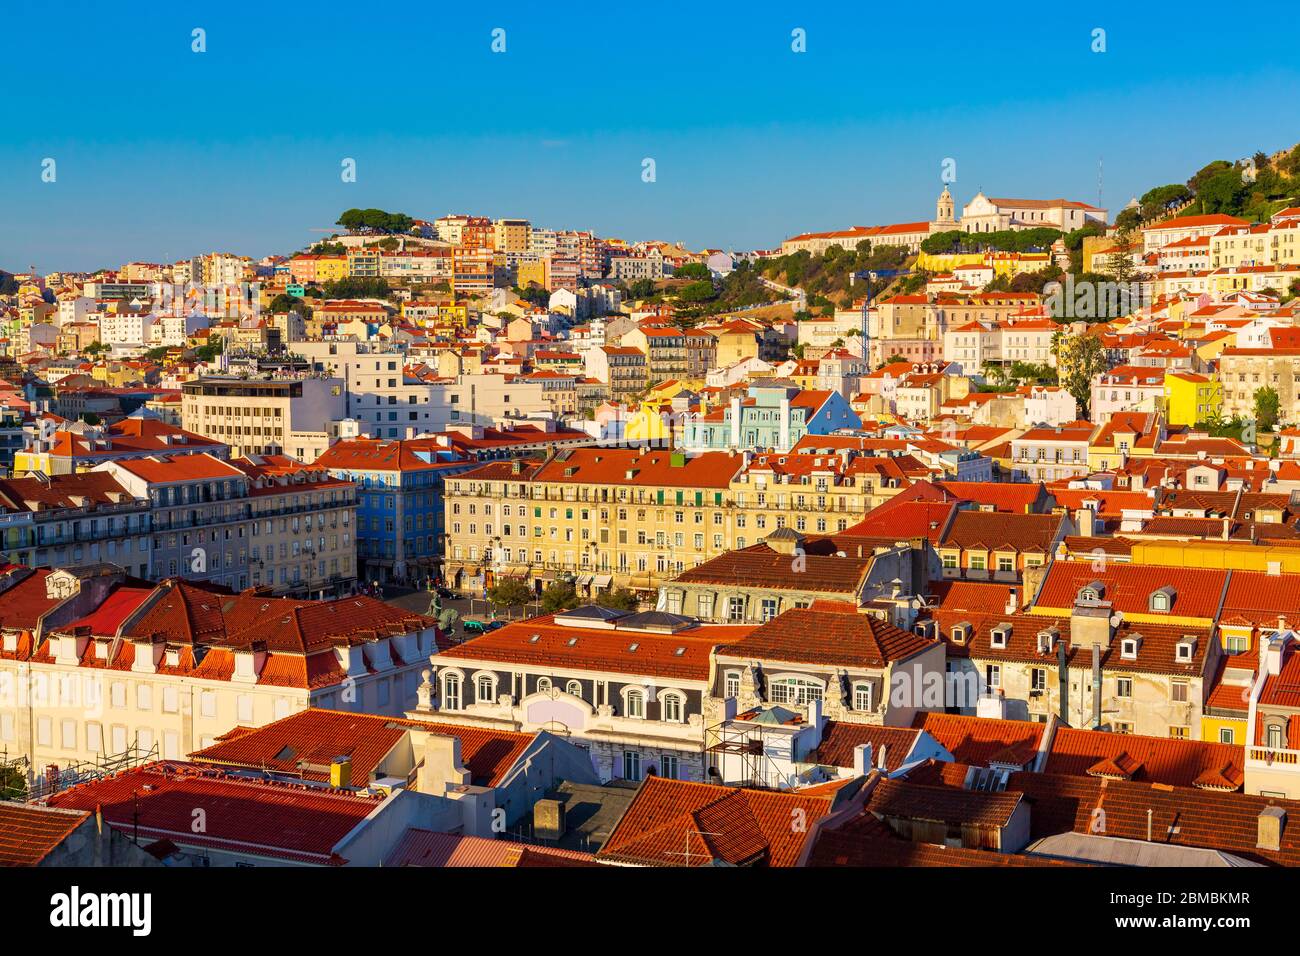 Old town panorama during sunset seen from Santa Justa Lift in Lisbon city, Portugal Stock Photo